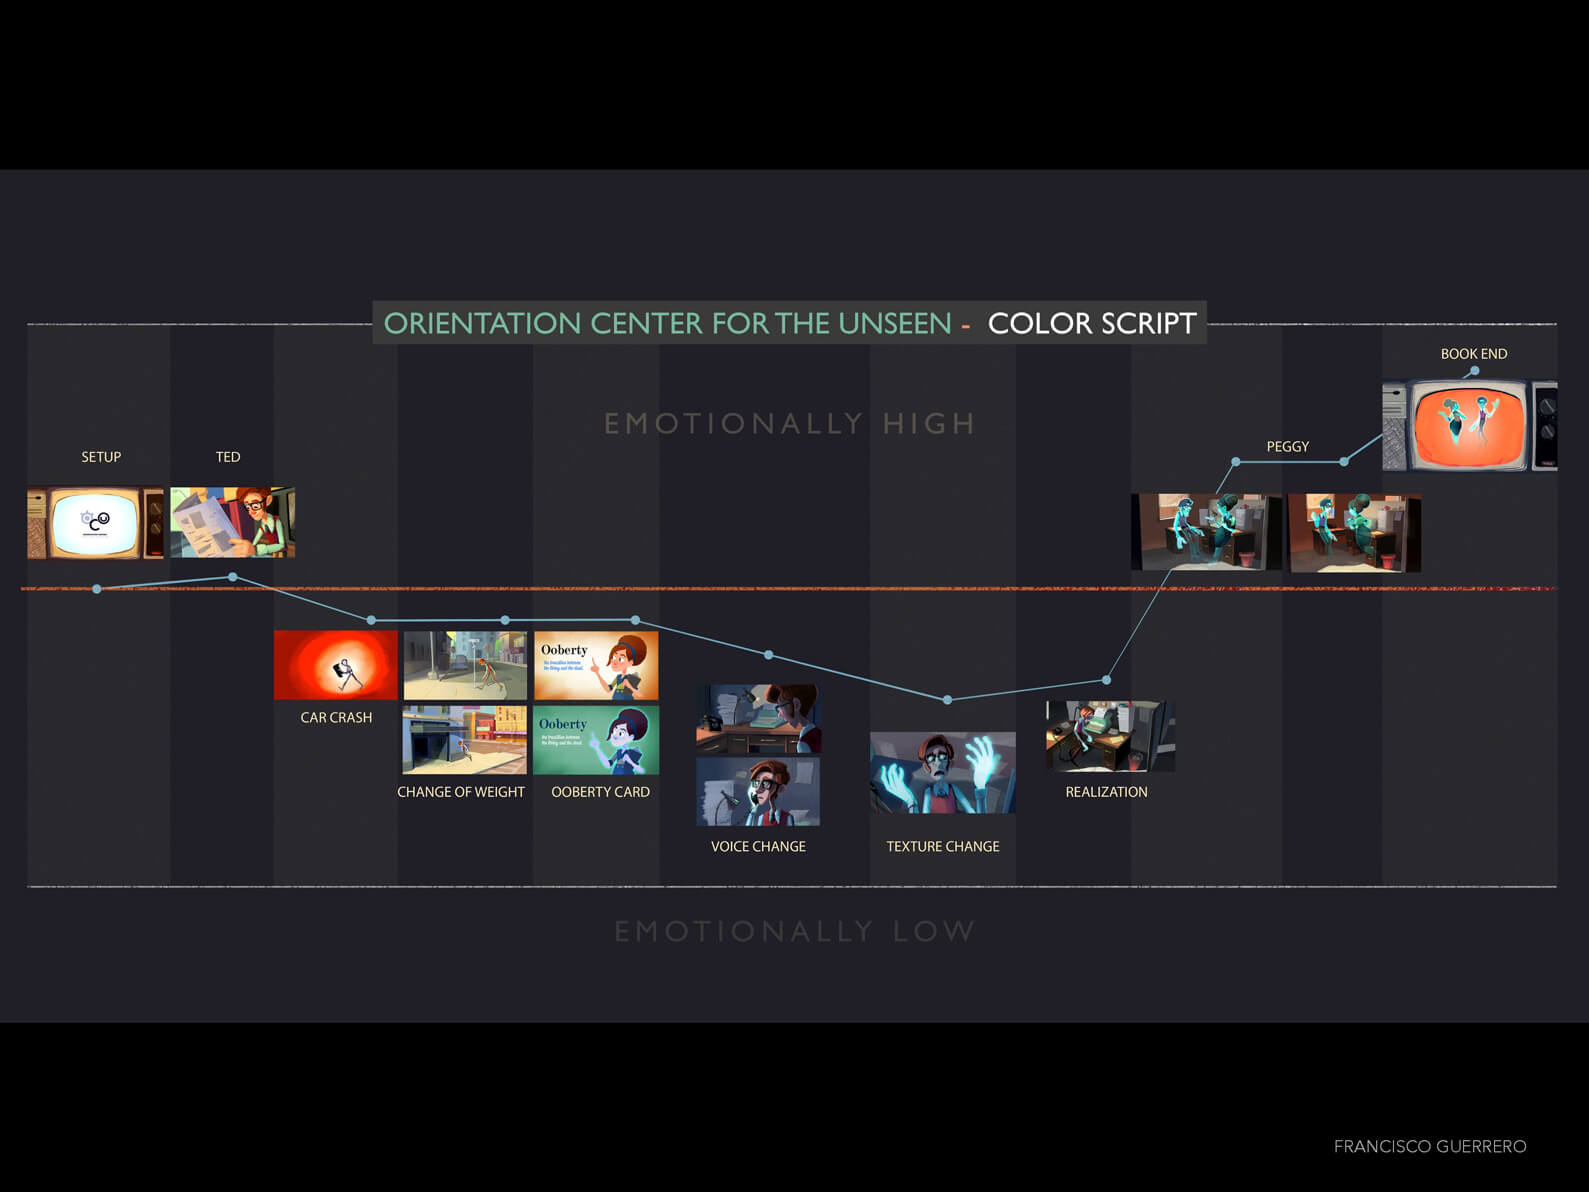 Color script depicting the emotional intensity level for various scenes in Orientation Center for the Unseen